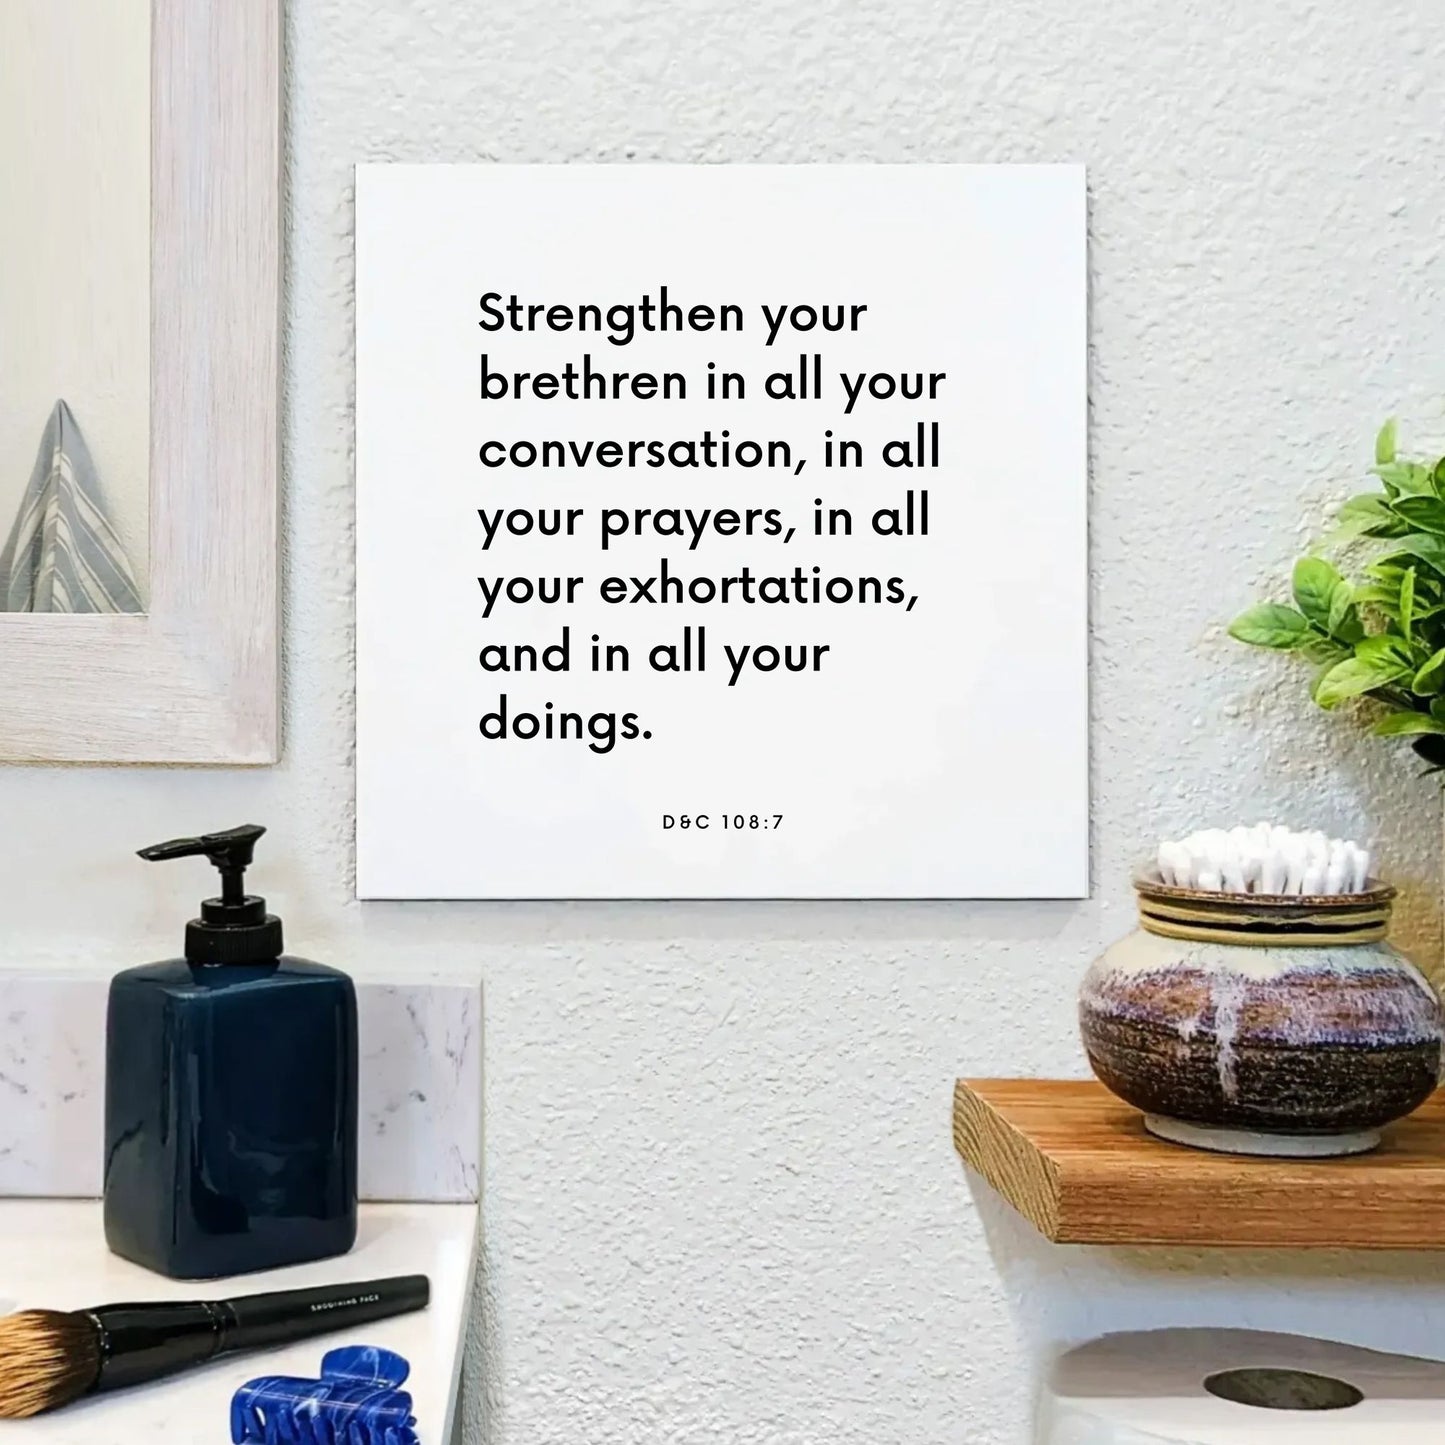 Bathroom mouting of the scripture tile for D&C 108:7 - "Strengthen your brethren in all your conversation"